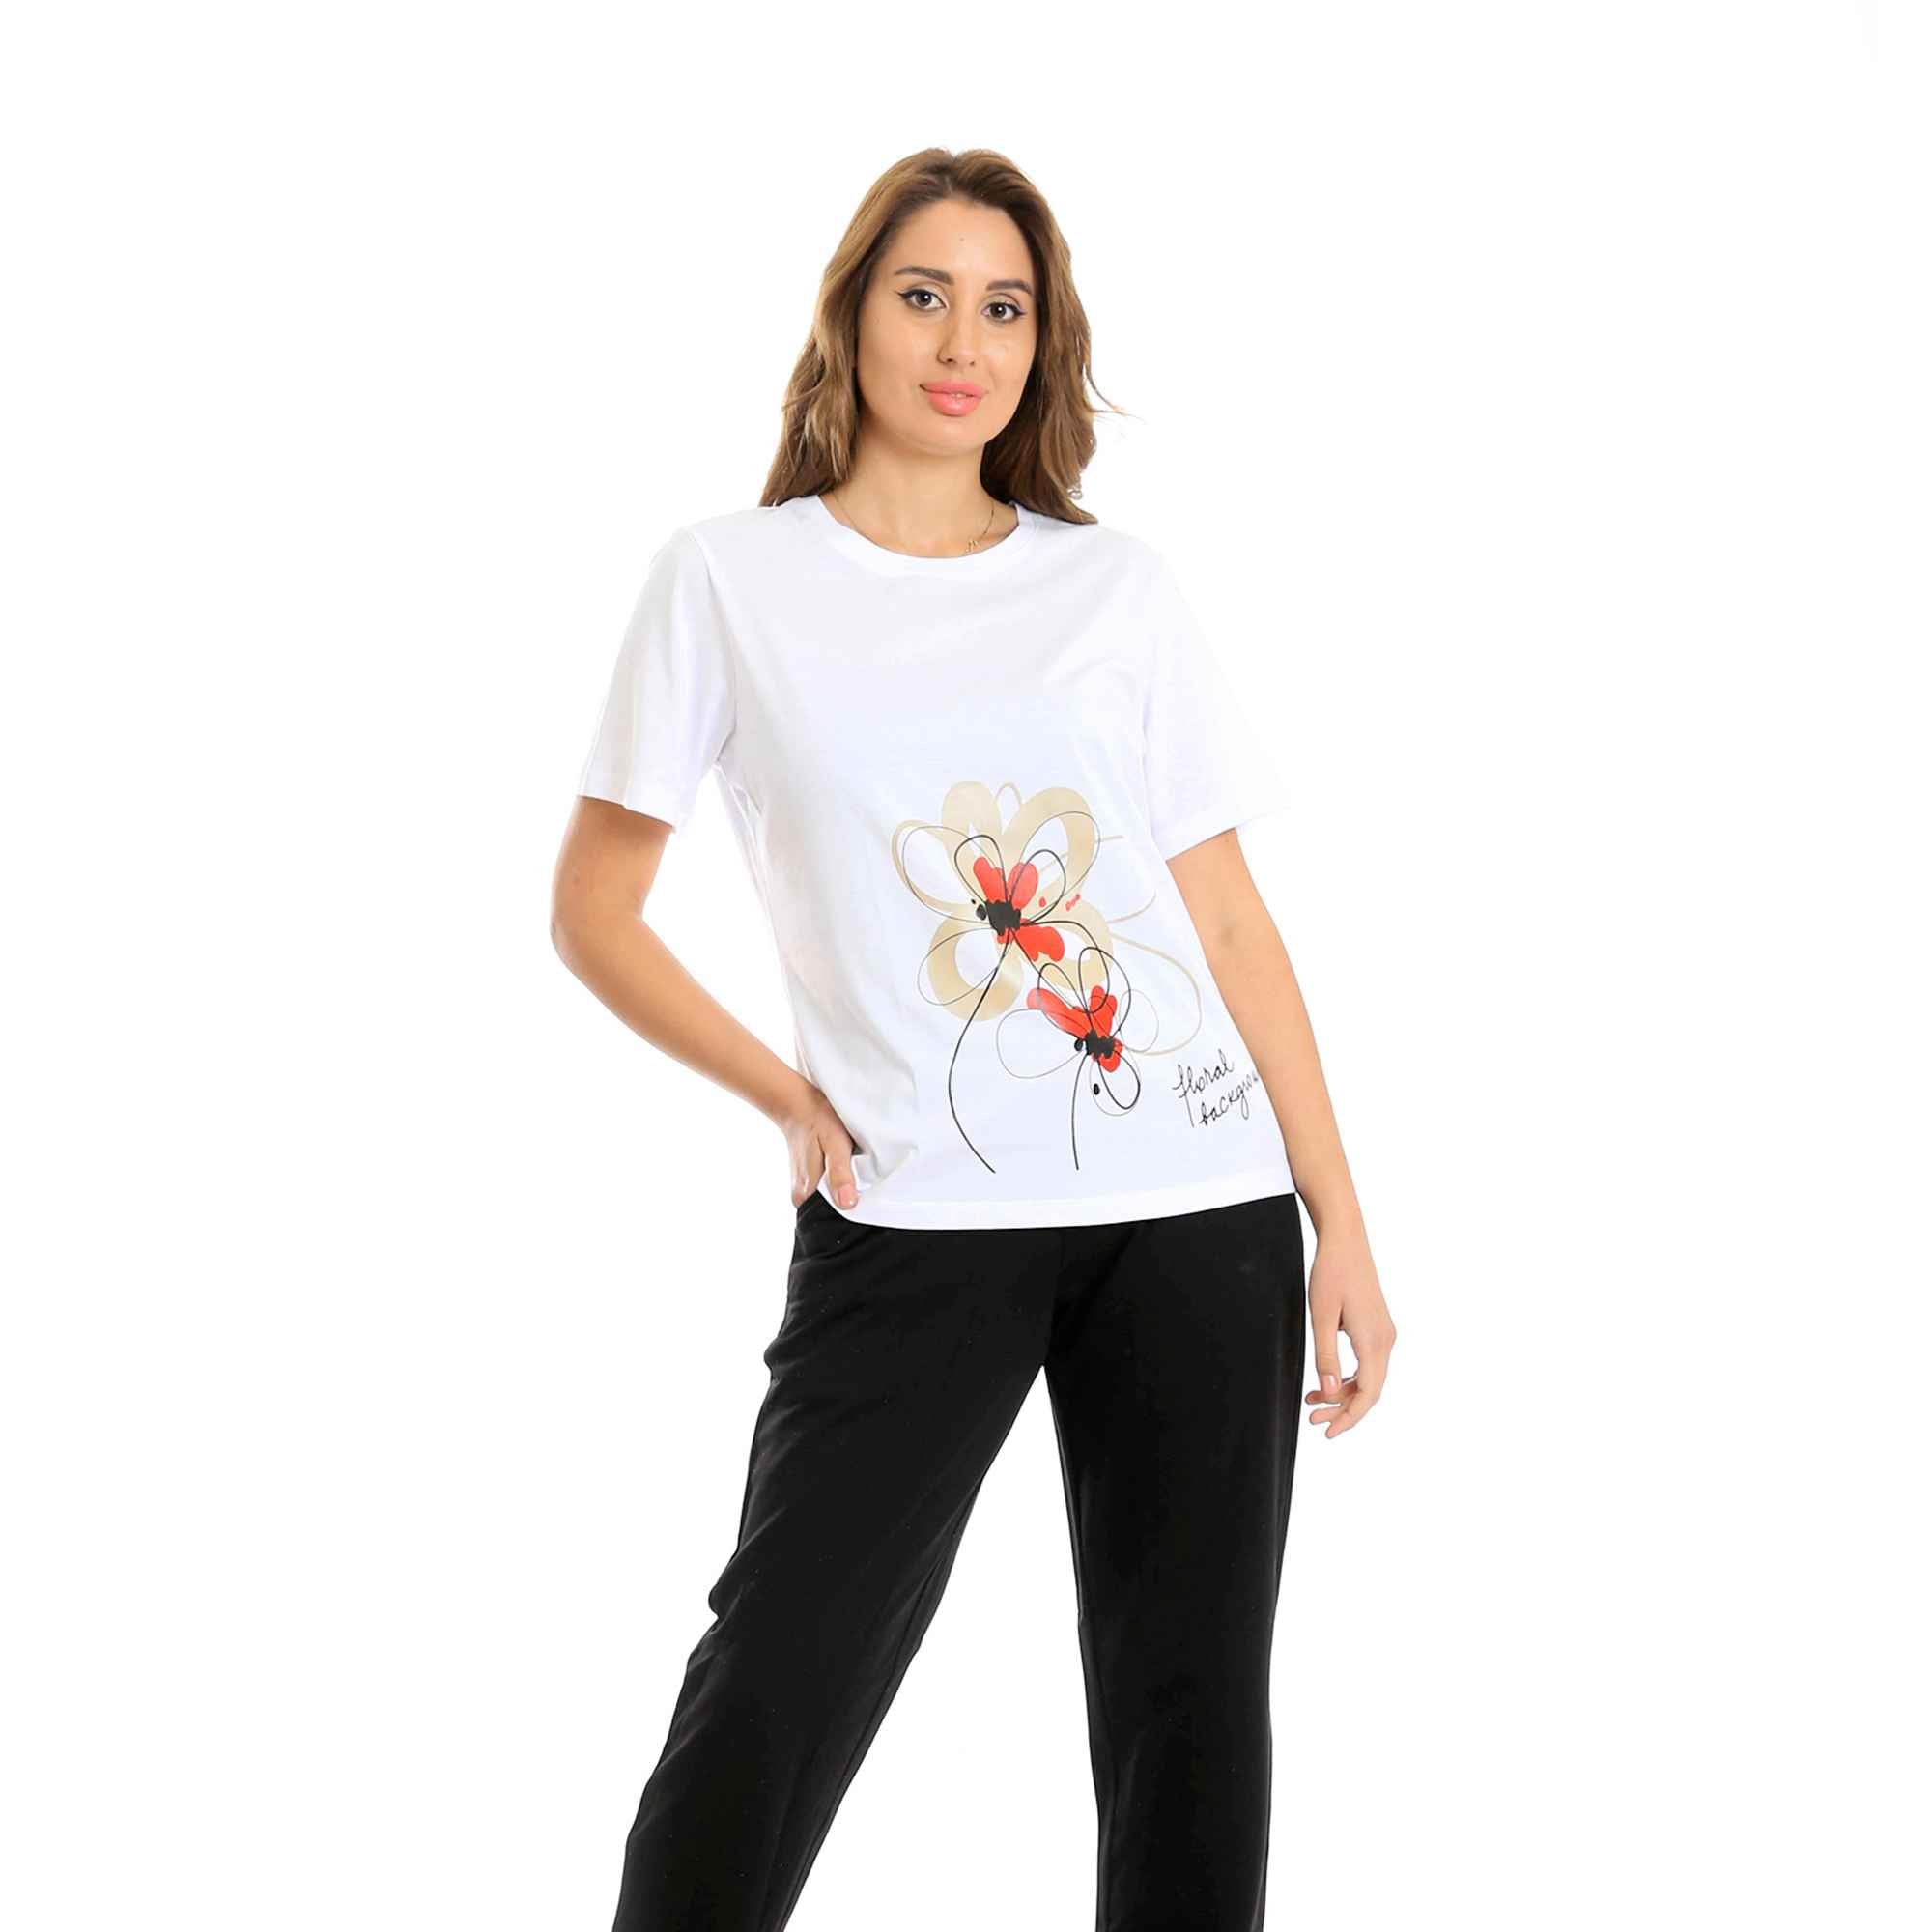 Red Cotton Comfortable and Stylish Activewear Pajamas for Women - White & Black